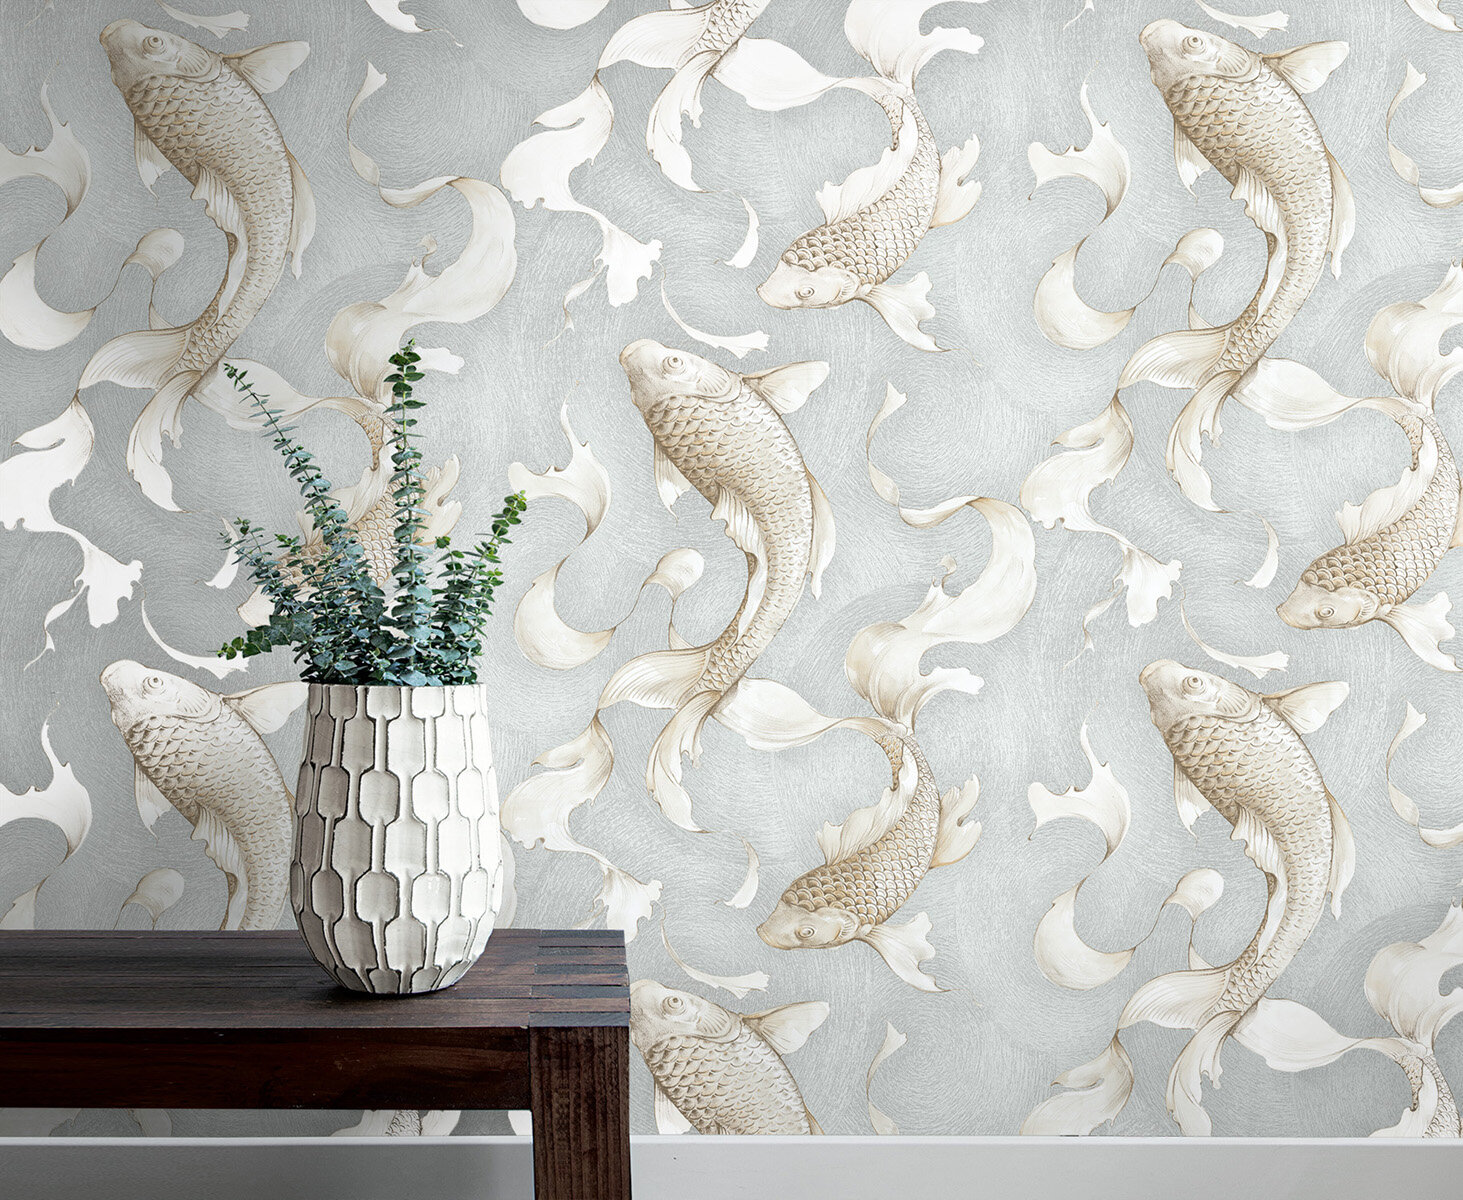 Blue and White Fish Nautical Peel and Stick Removable Wallpaper 9958  Bed  Bath  Beyond  34161384